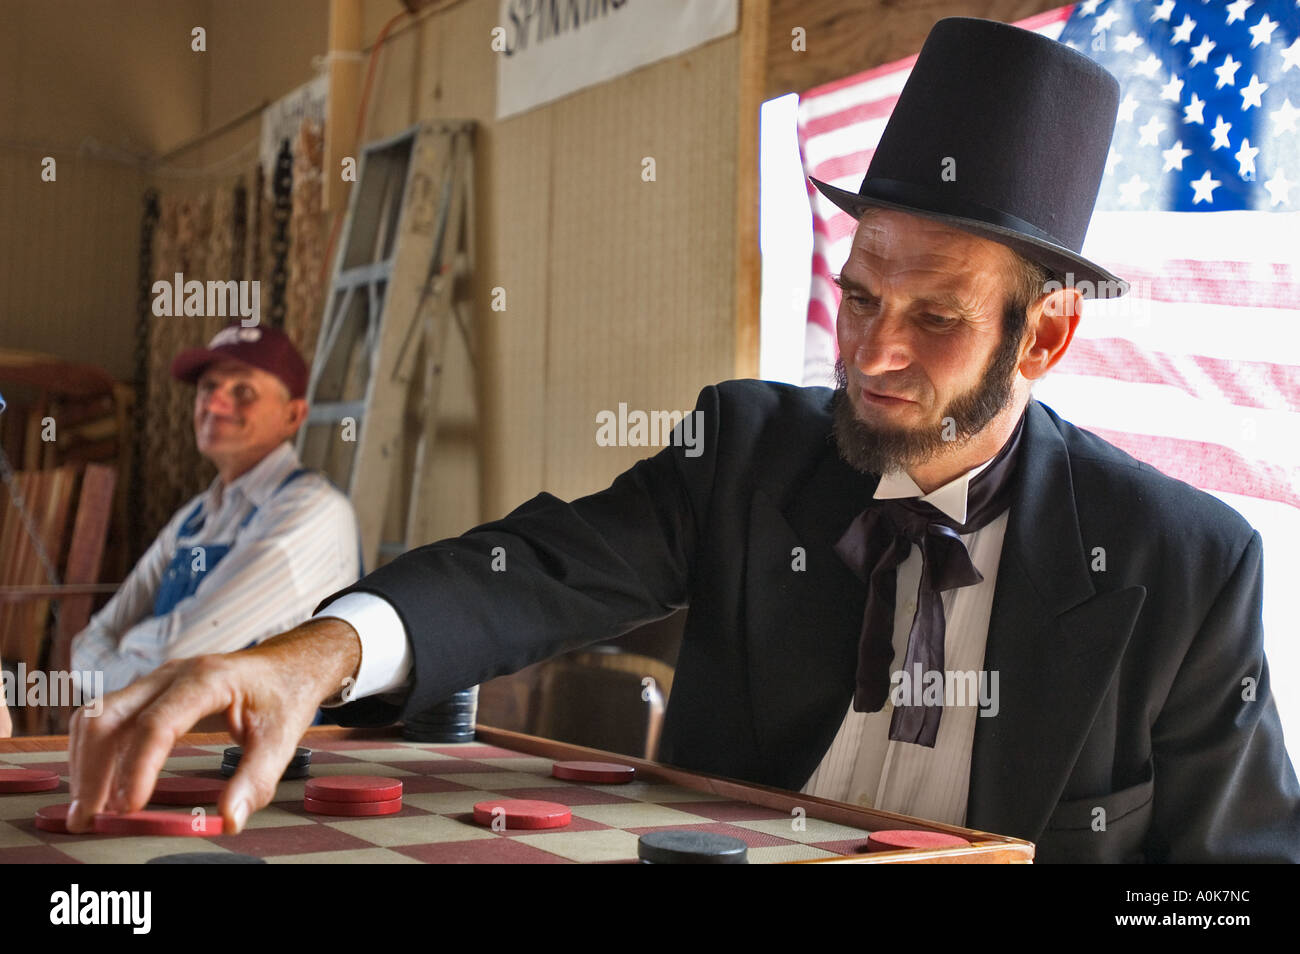 Abe Lincoln Impersonator Playing Checkers Lanesville Heritage Festival Lanesville Indiana Stock Photo